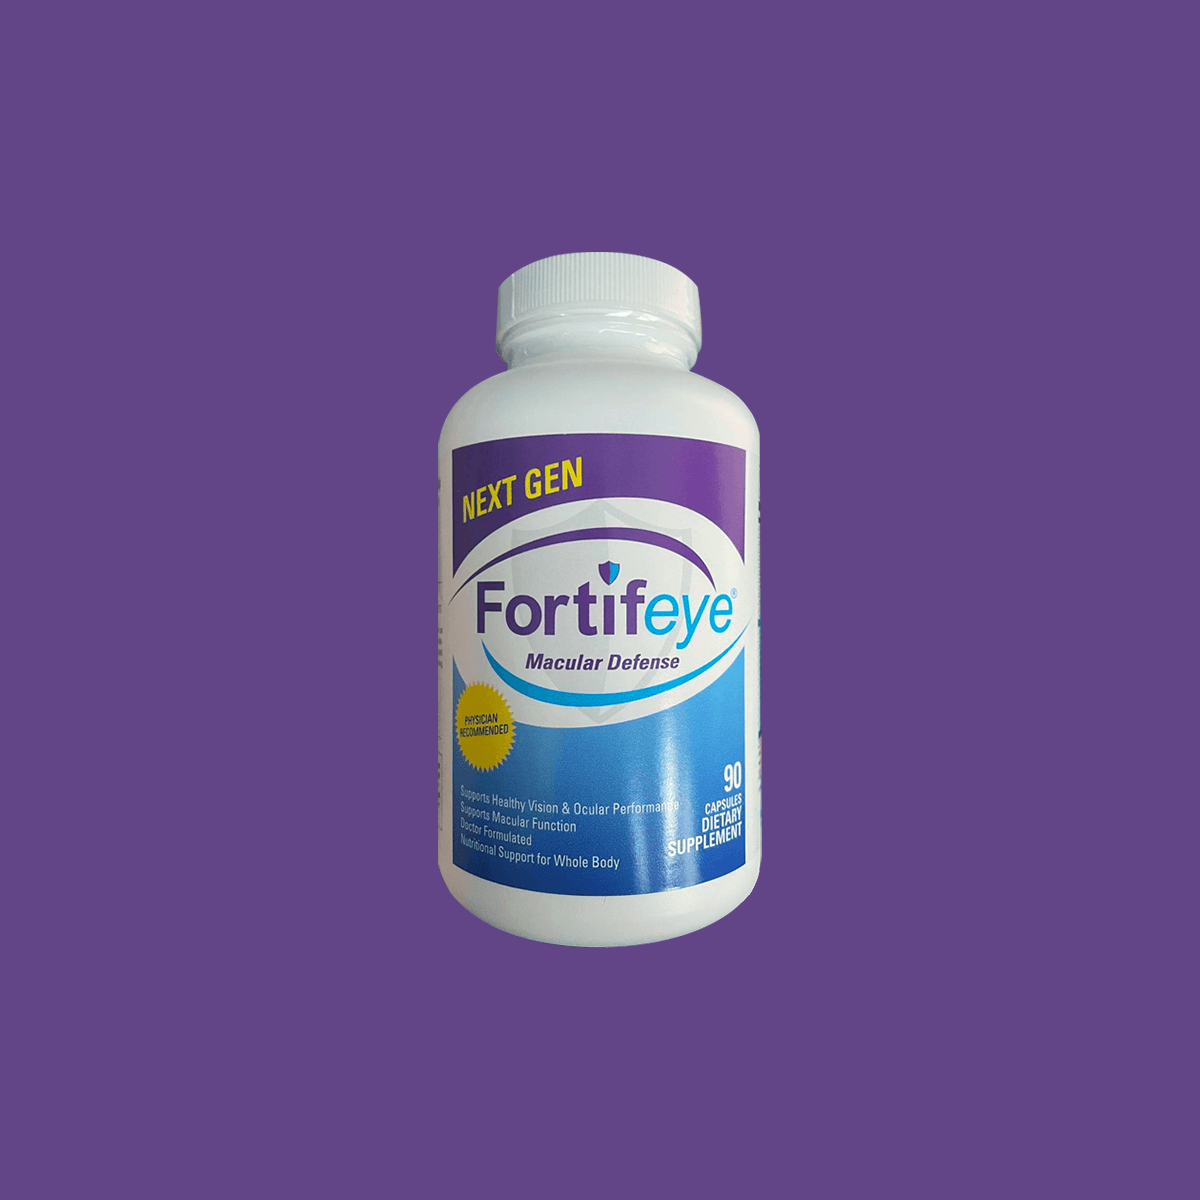 Fortifeye Next Gen Macular Defense Eye and Whole Body Support (90ct - 3 Month Supply) - Dryeye Rescue